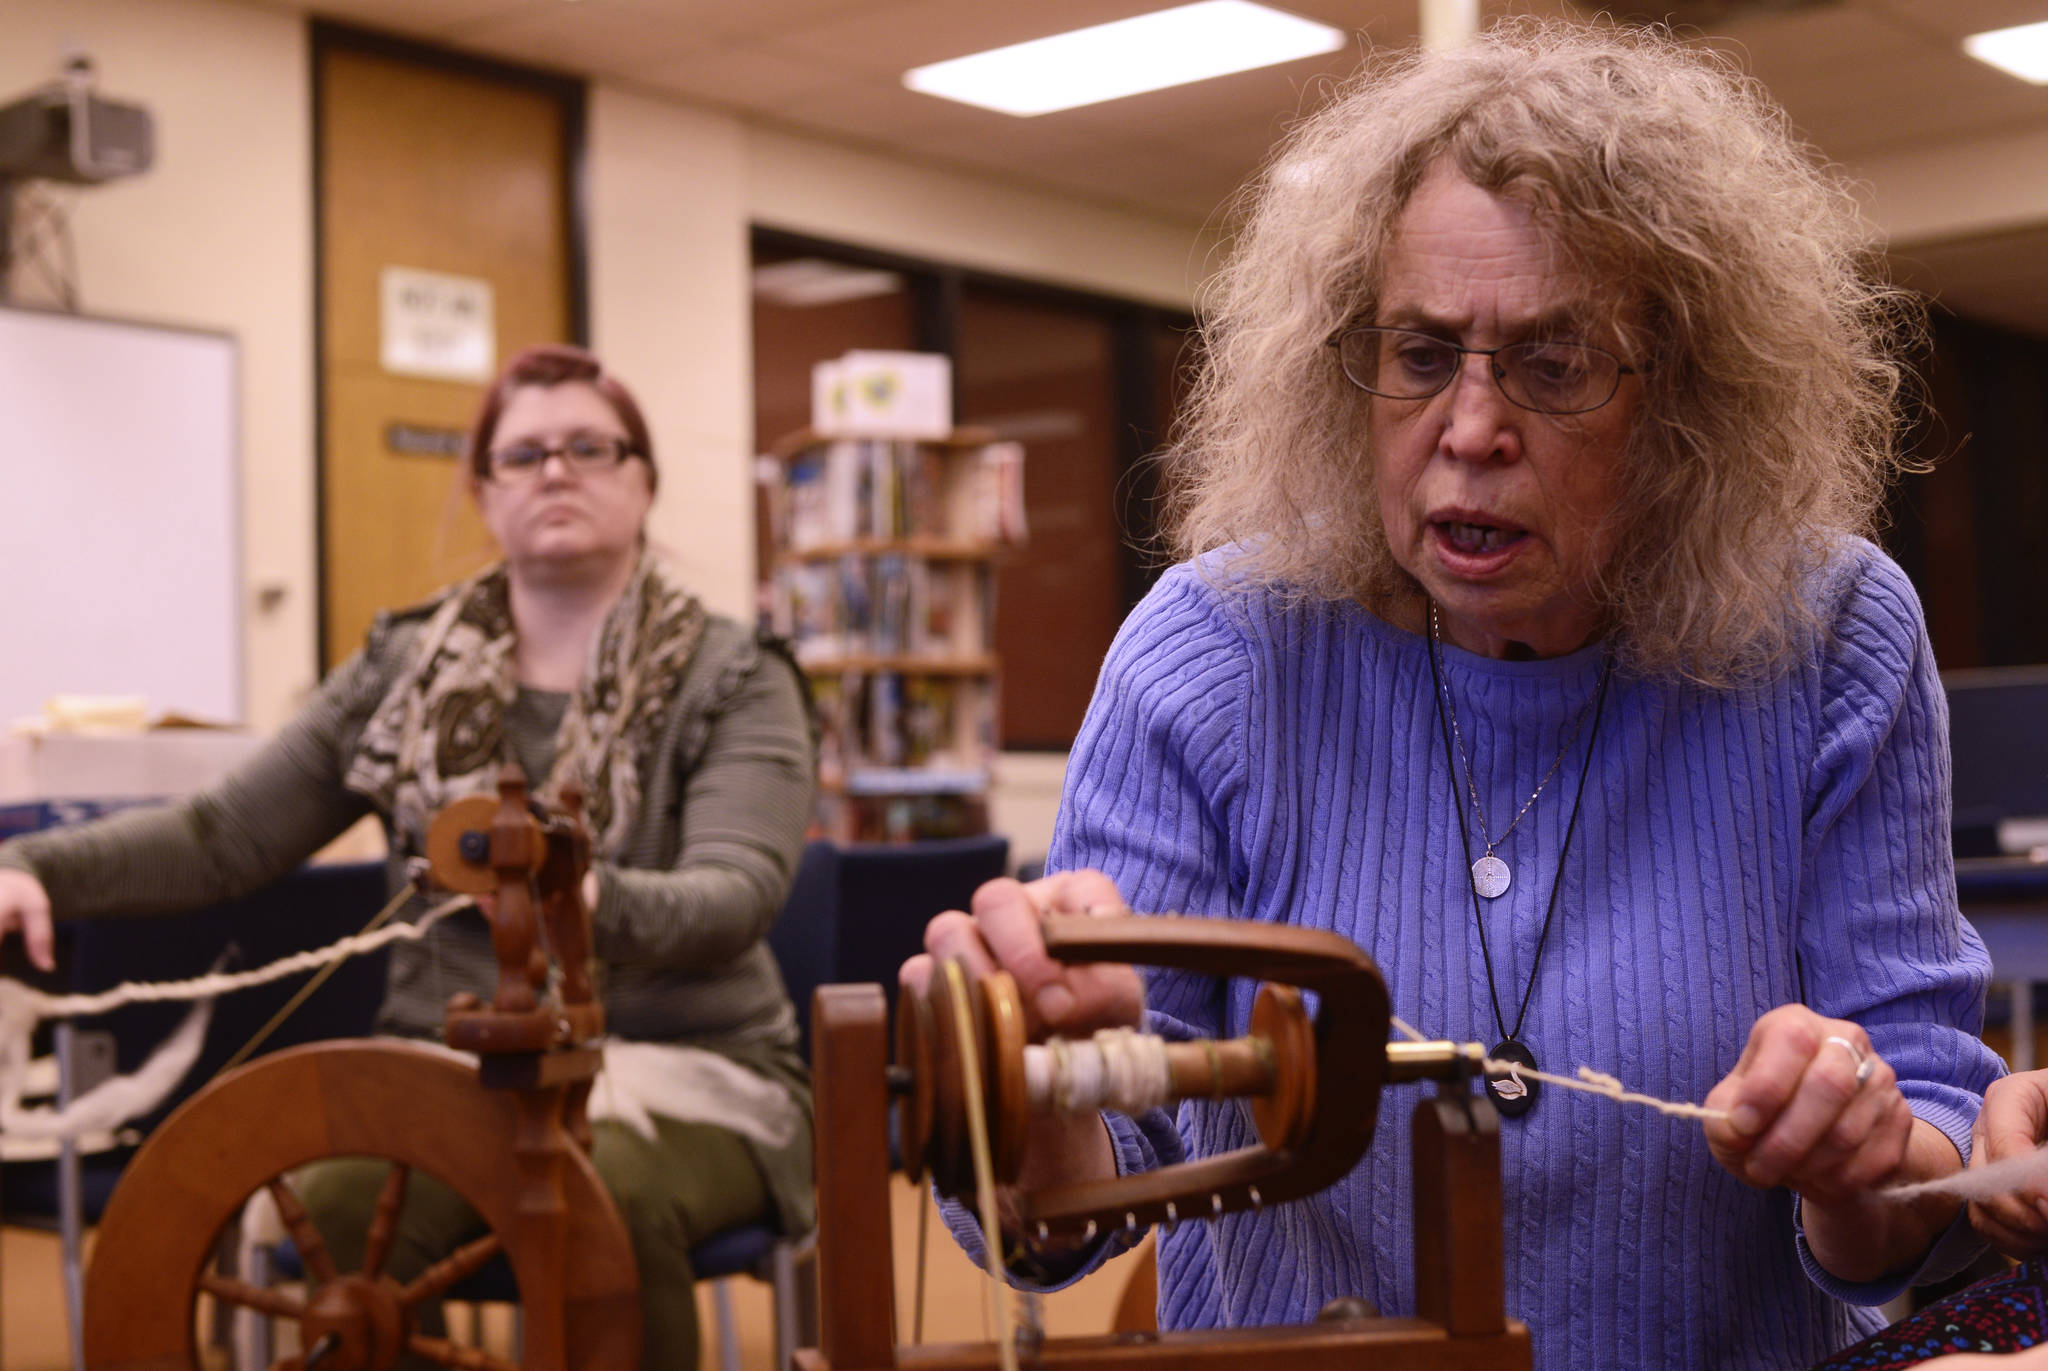 Instructor Lee Coray-Ludden (center) shows how to spin yarn from wool on a kick-driven spinning wheel, with student Amy Townson practicing in the background on Tuesday in the Soldotna Preparatory School library. In her four-session weekly yarn spinning class, part of the Soldotna Community Schools program, Coray-Ludden will teach students to spin and ply yarn from locally-grown wool and fleece, including exotic fibers from cashmere goats, alpacas, and llamas. (Photo by Ben Boettger/Peninsula Clarion).